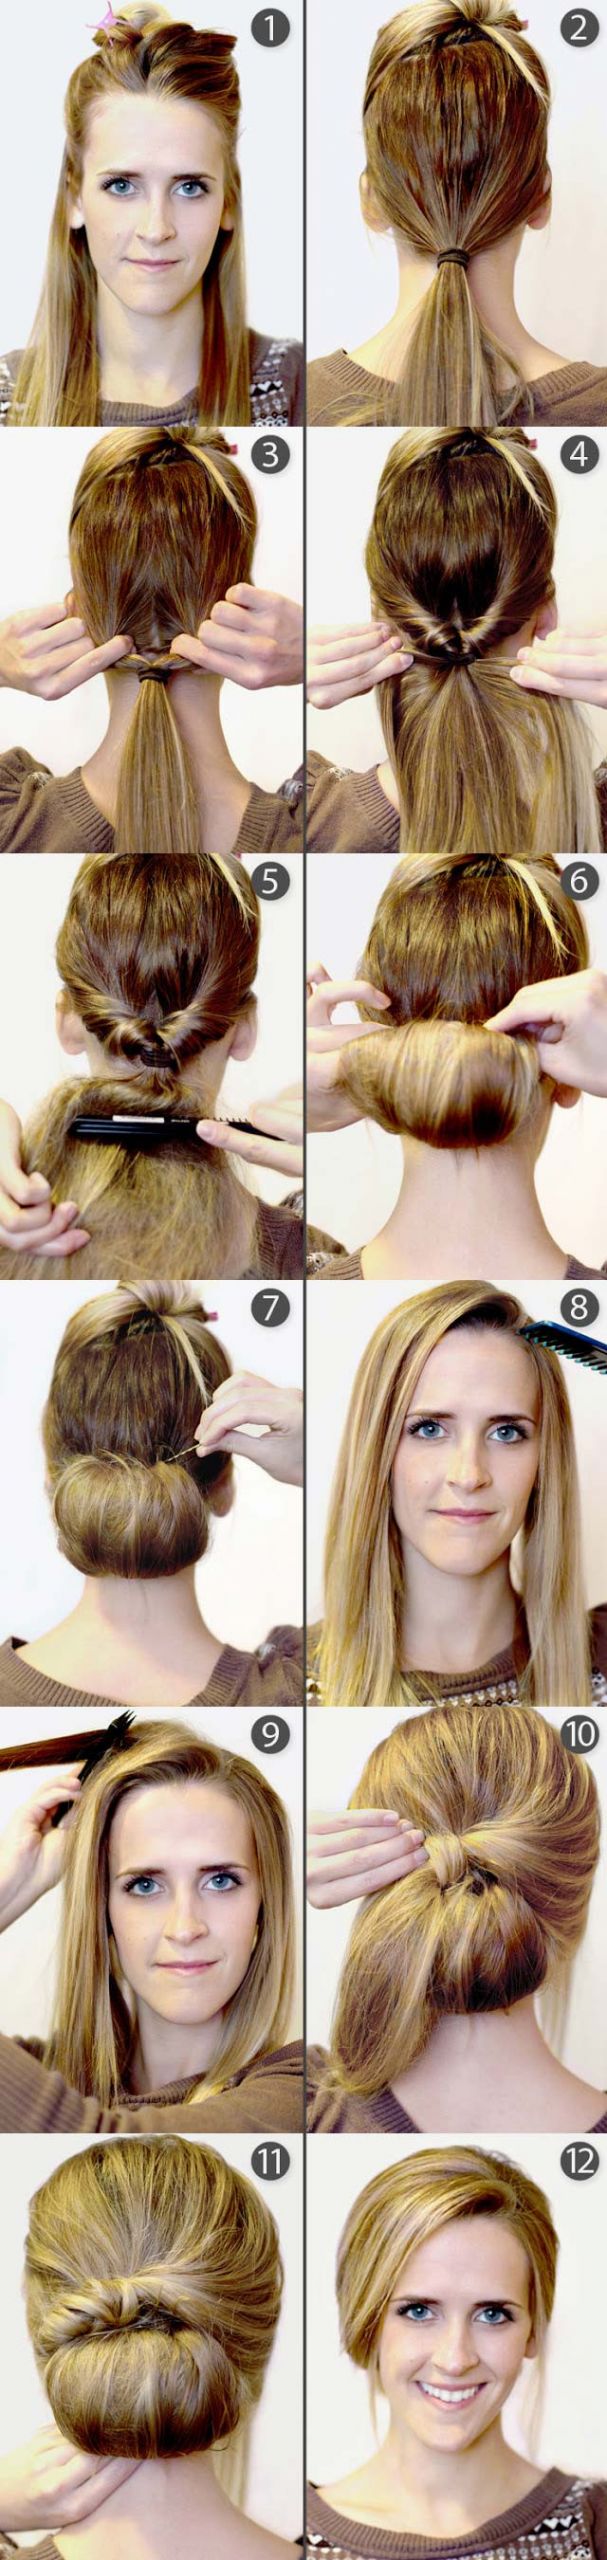 DIY Haircut For Women
 9 Pretty DIY Hairstyles With Step by Step Tutorials